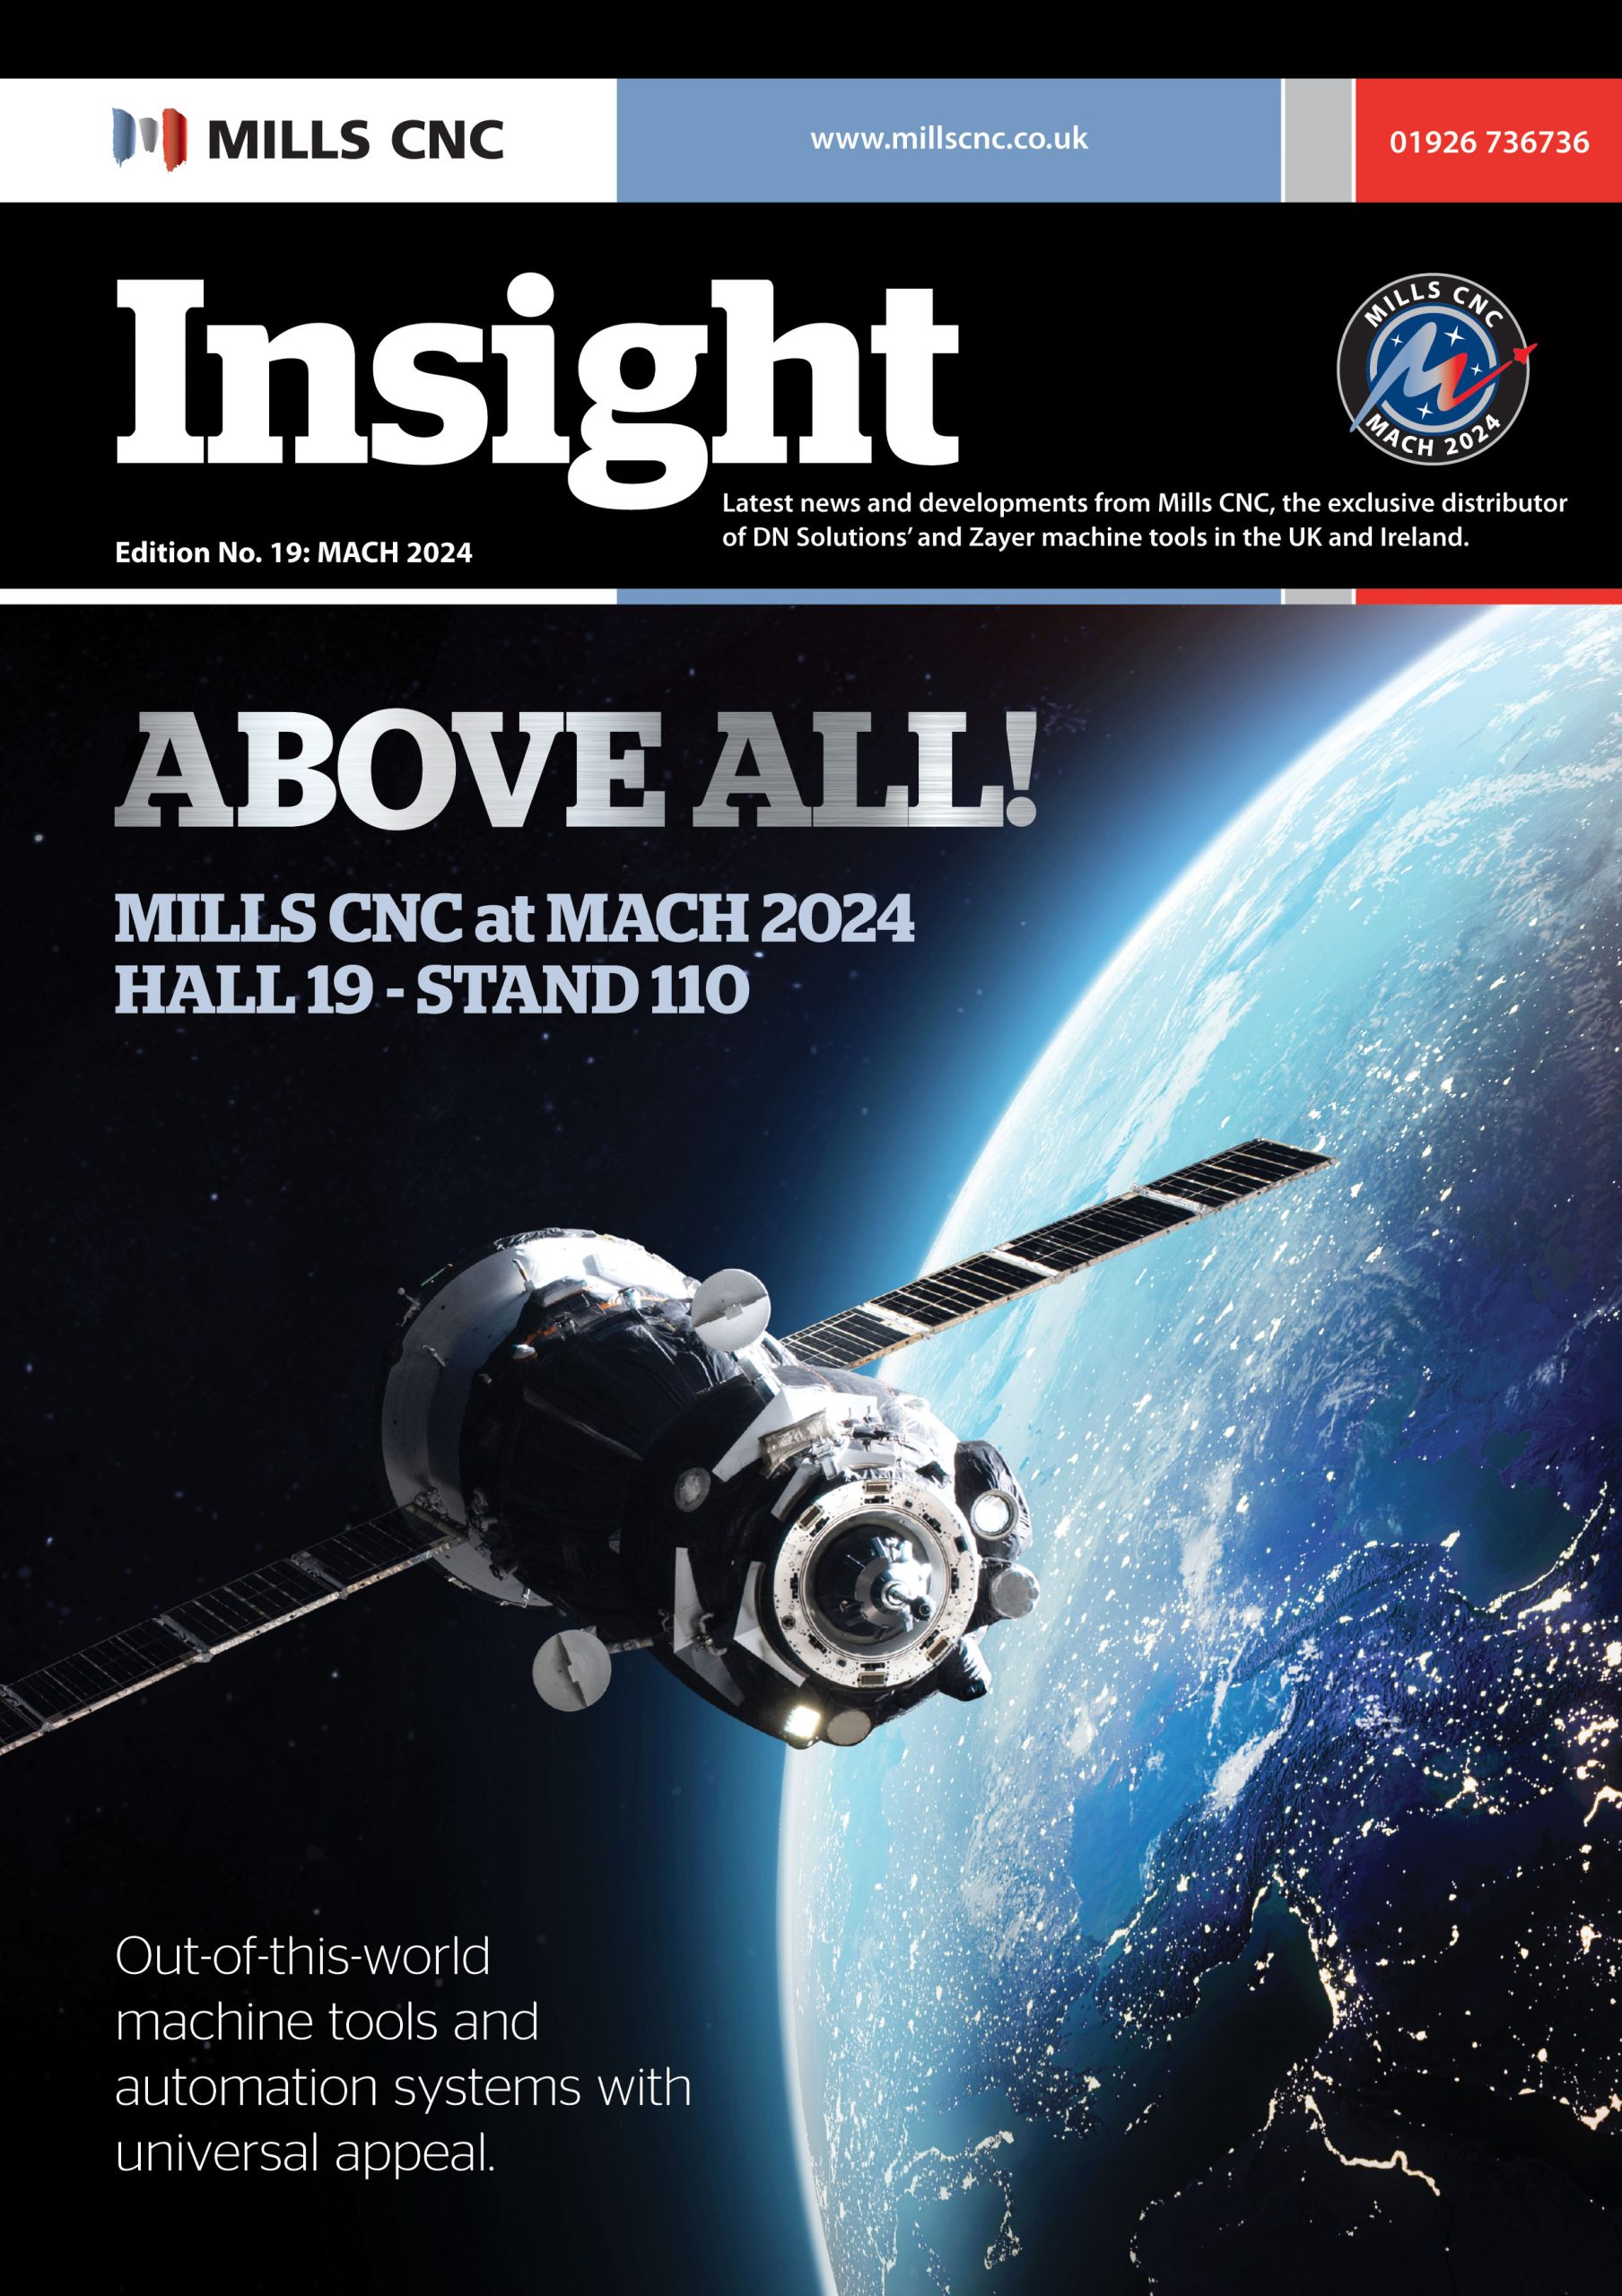 Close up of Insight Magazine Edition 19 front cover, showing space theme for MACH 2024